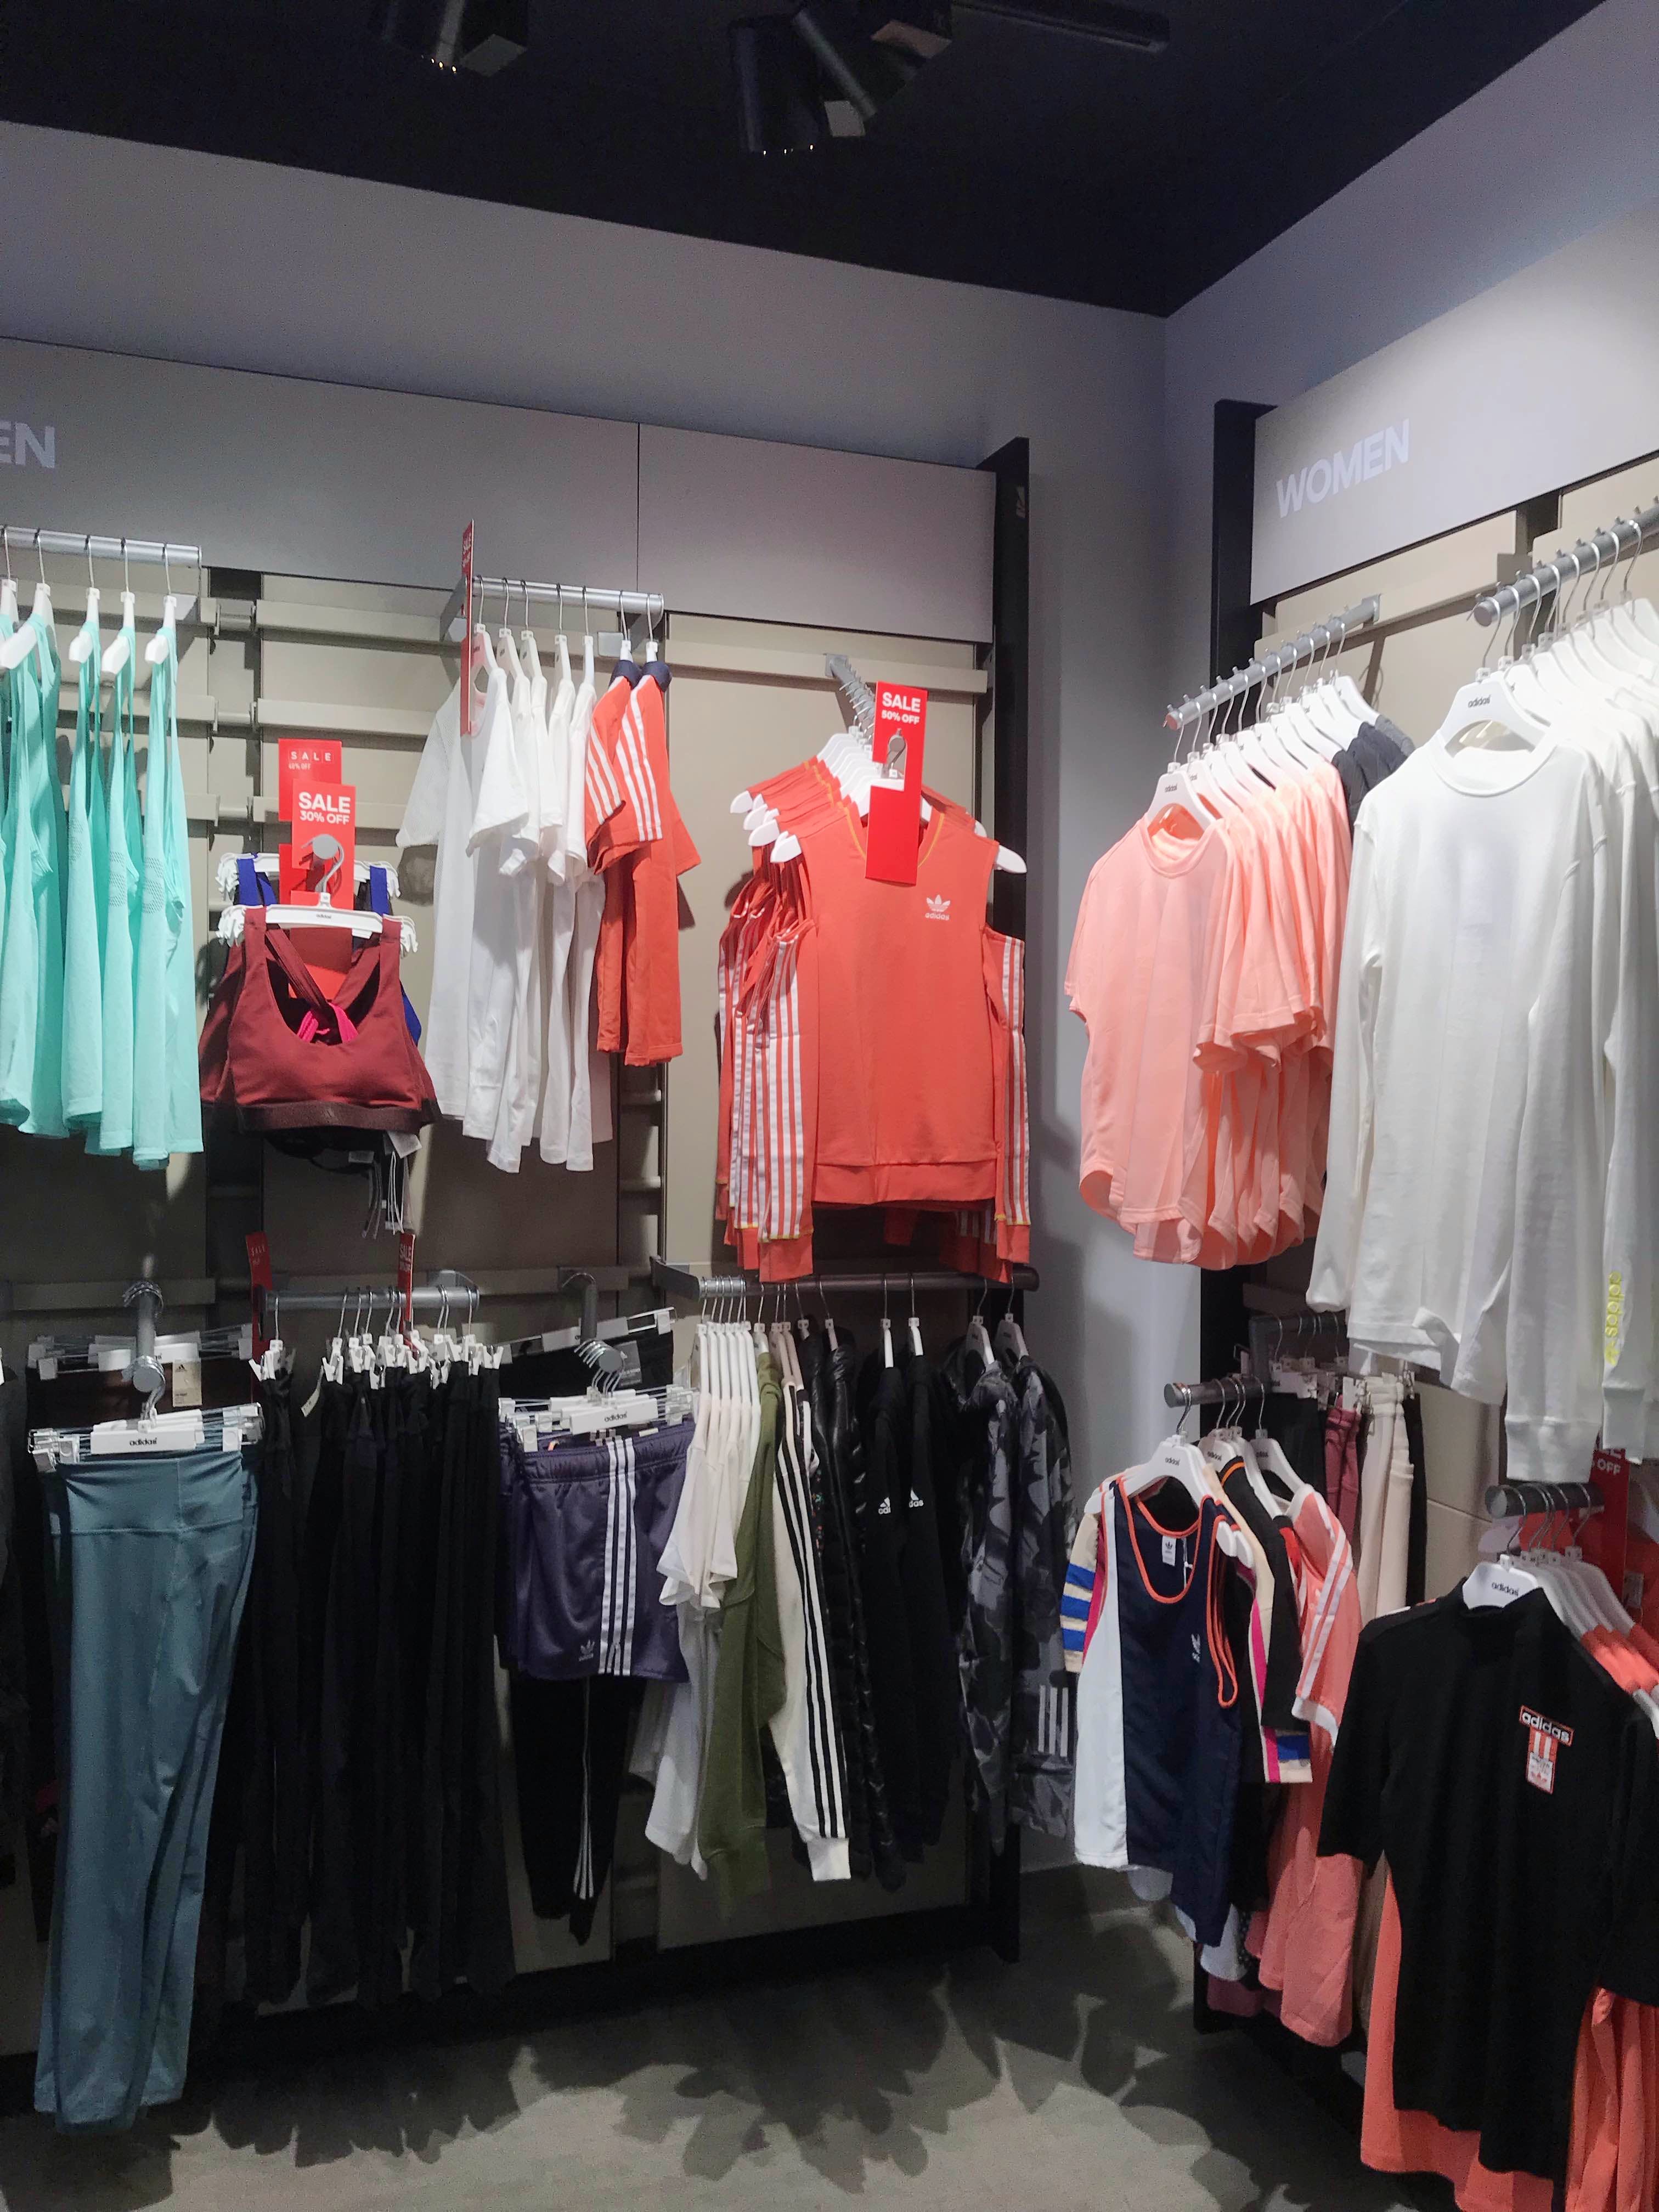 reebok outlets in bangalore